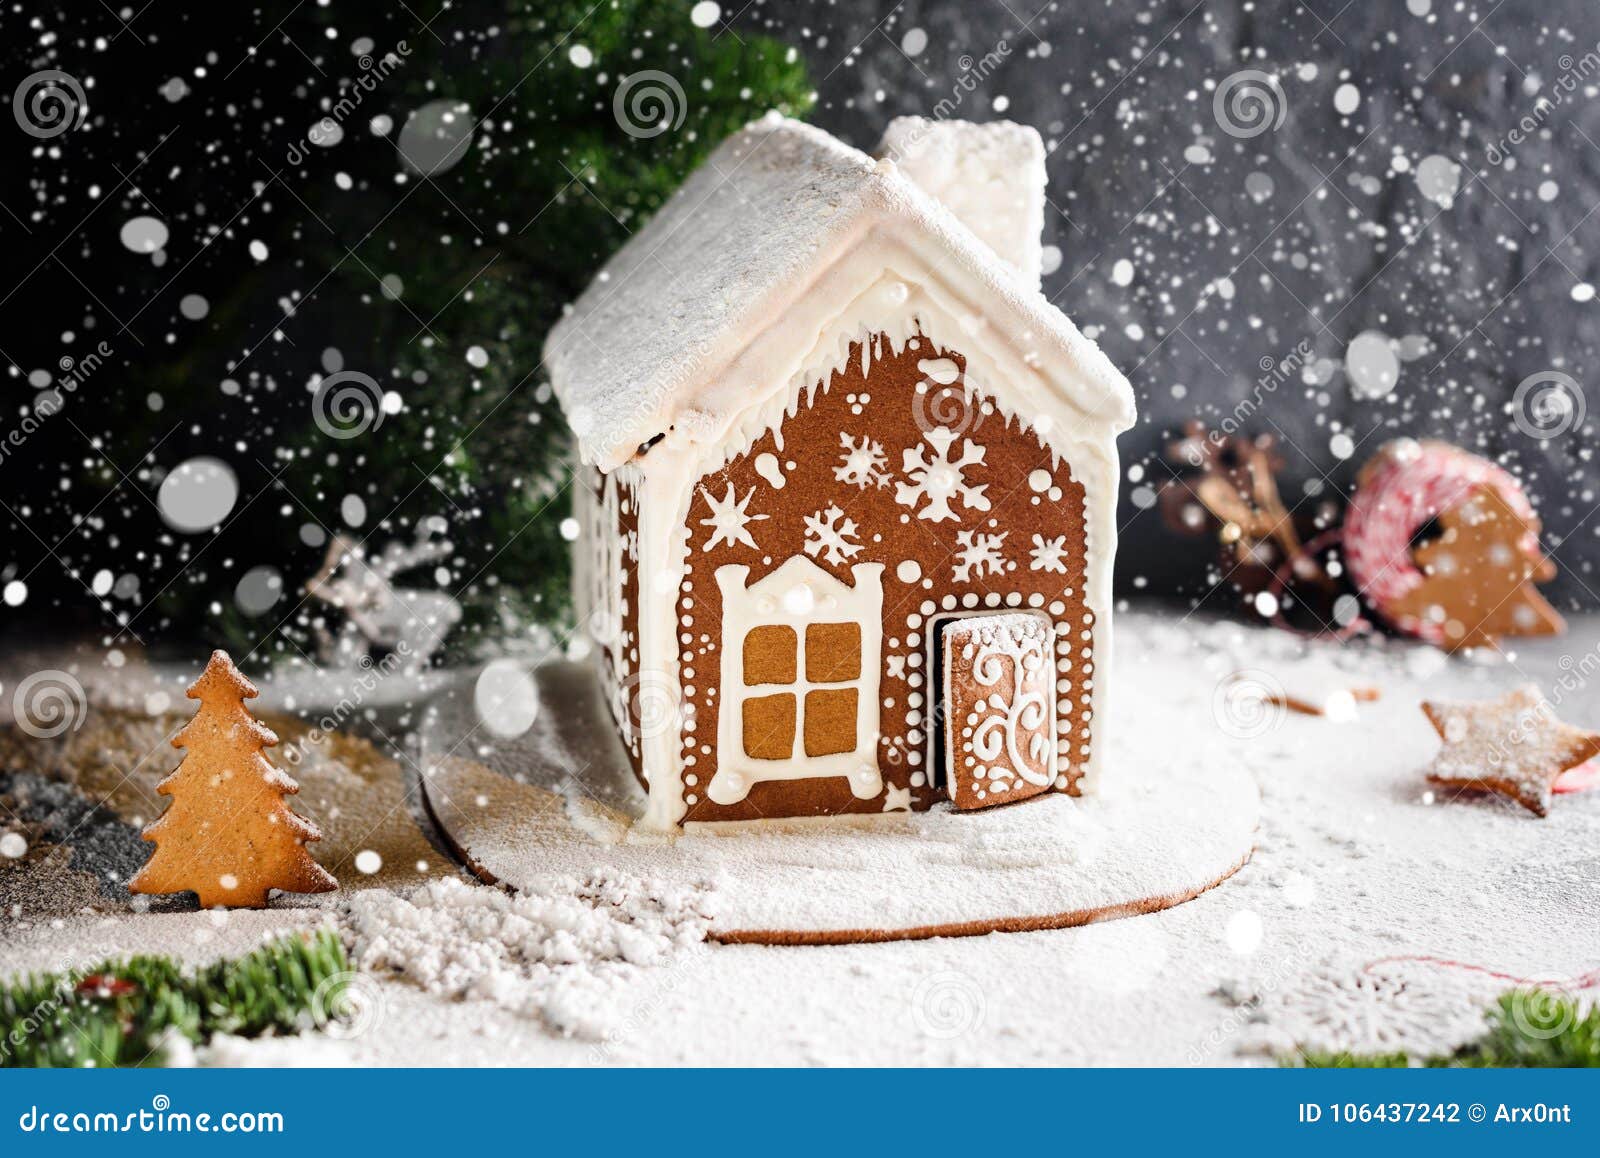 Homemade Gingerbread House Falling Snow And Festive